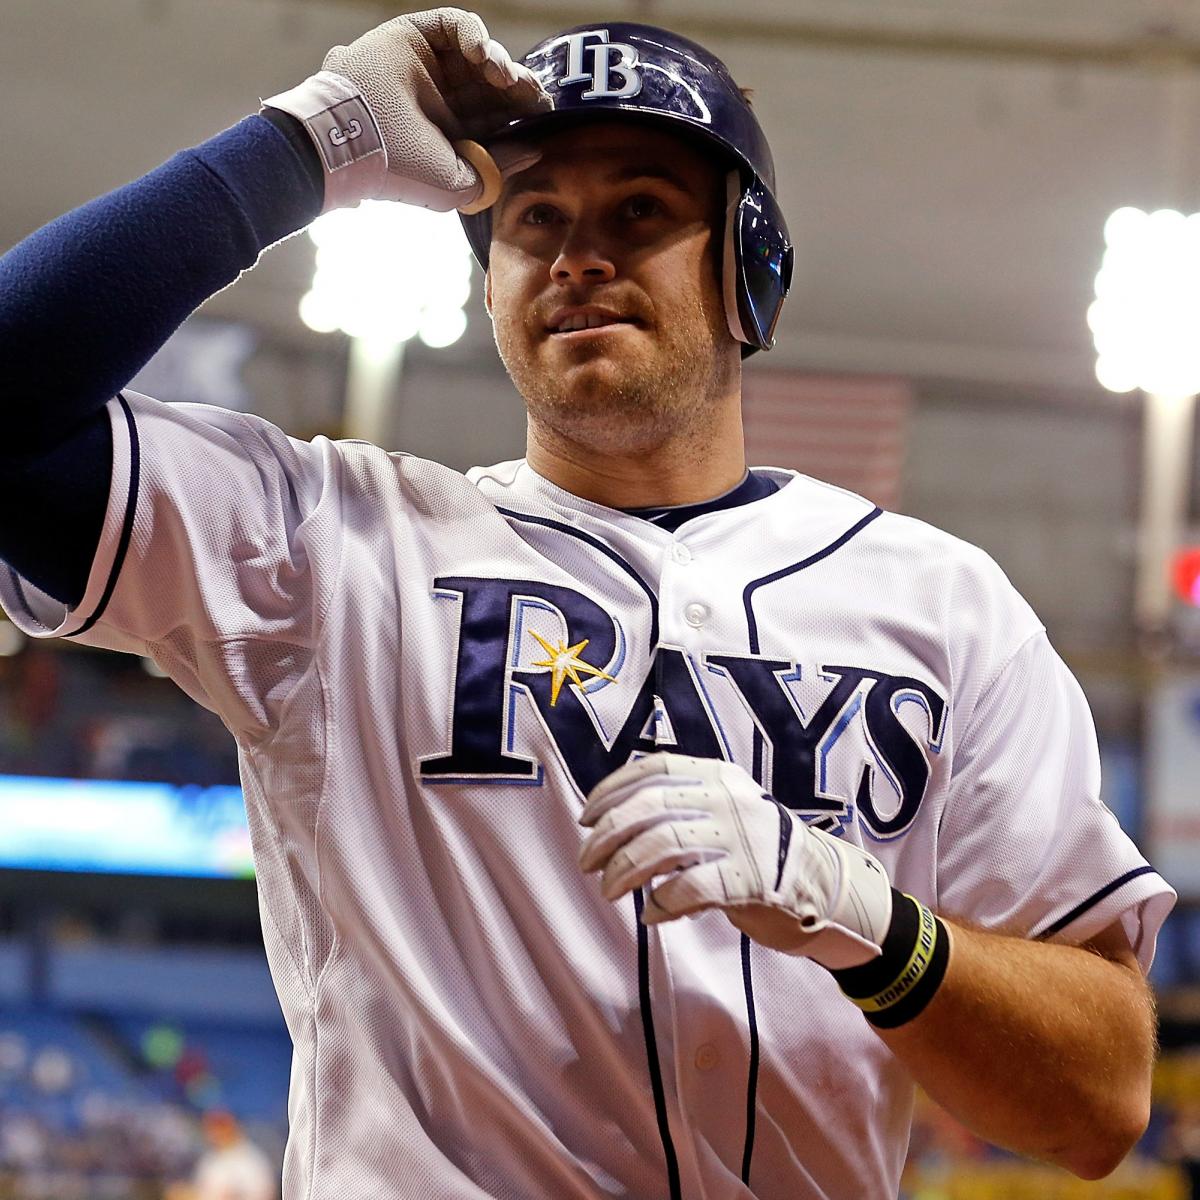 Evan Longoria Extension Rays Pick a Bad Time To Go AllIn on Star